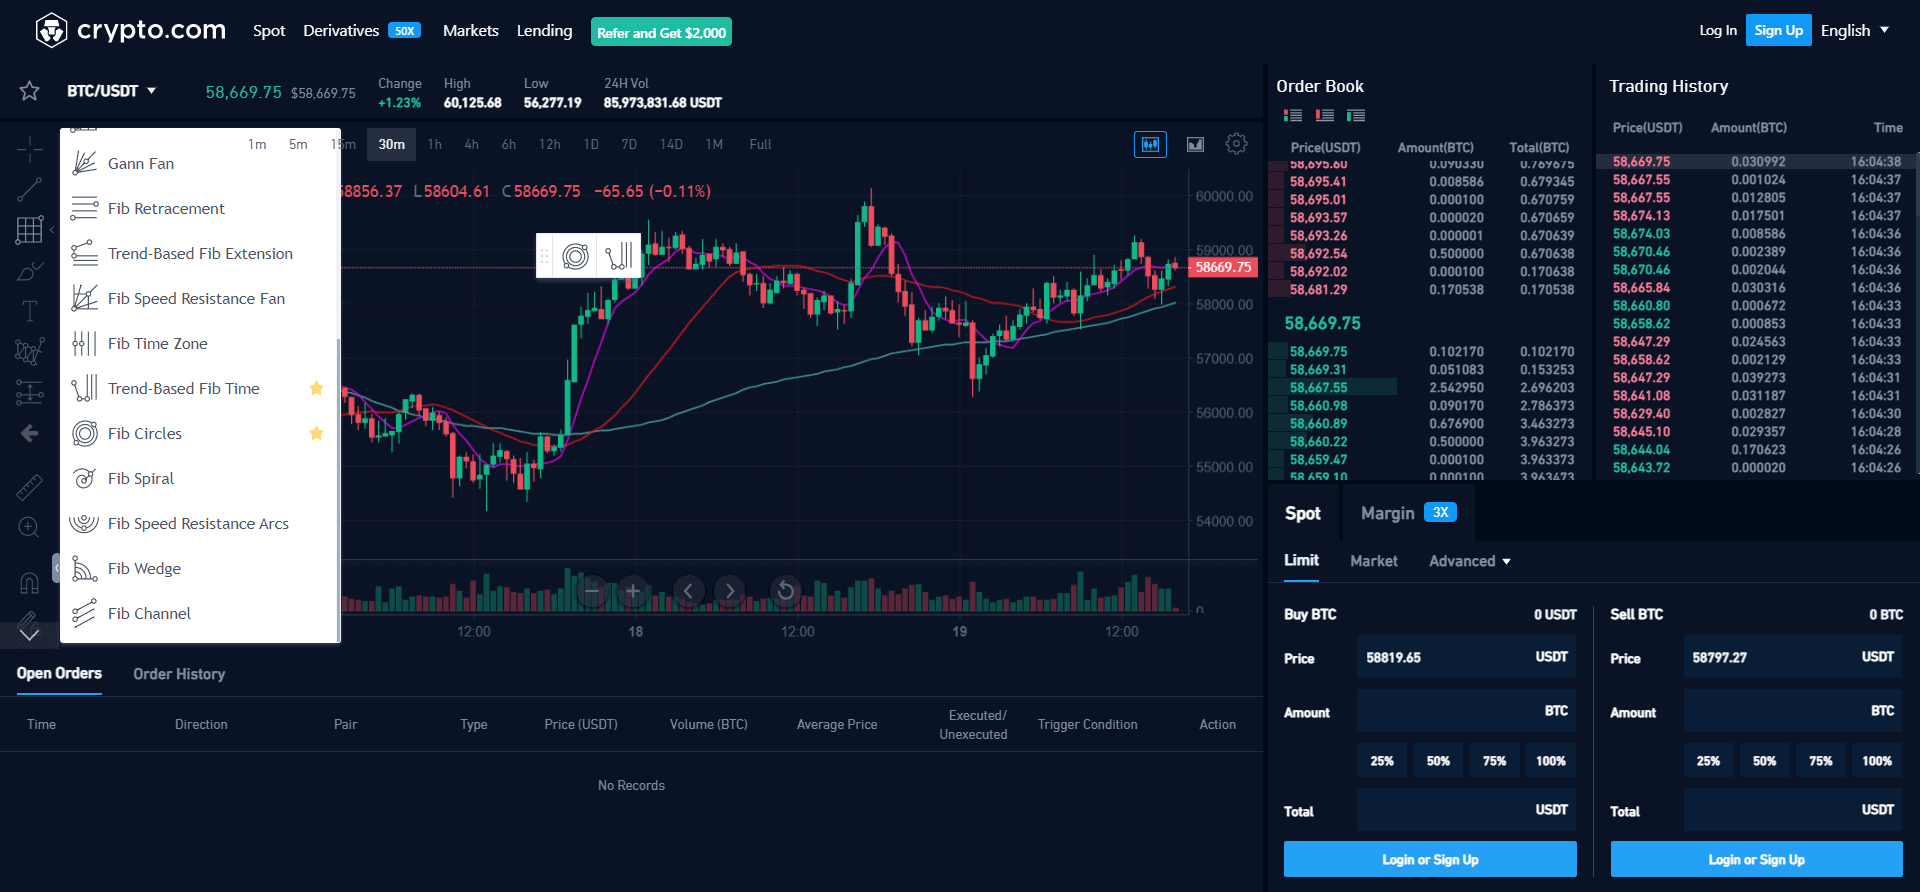 Crypto.com analytics on web showing a drop-down list of all charts available like Gann Fan, Fib Retracement, etc